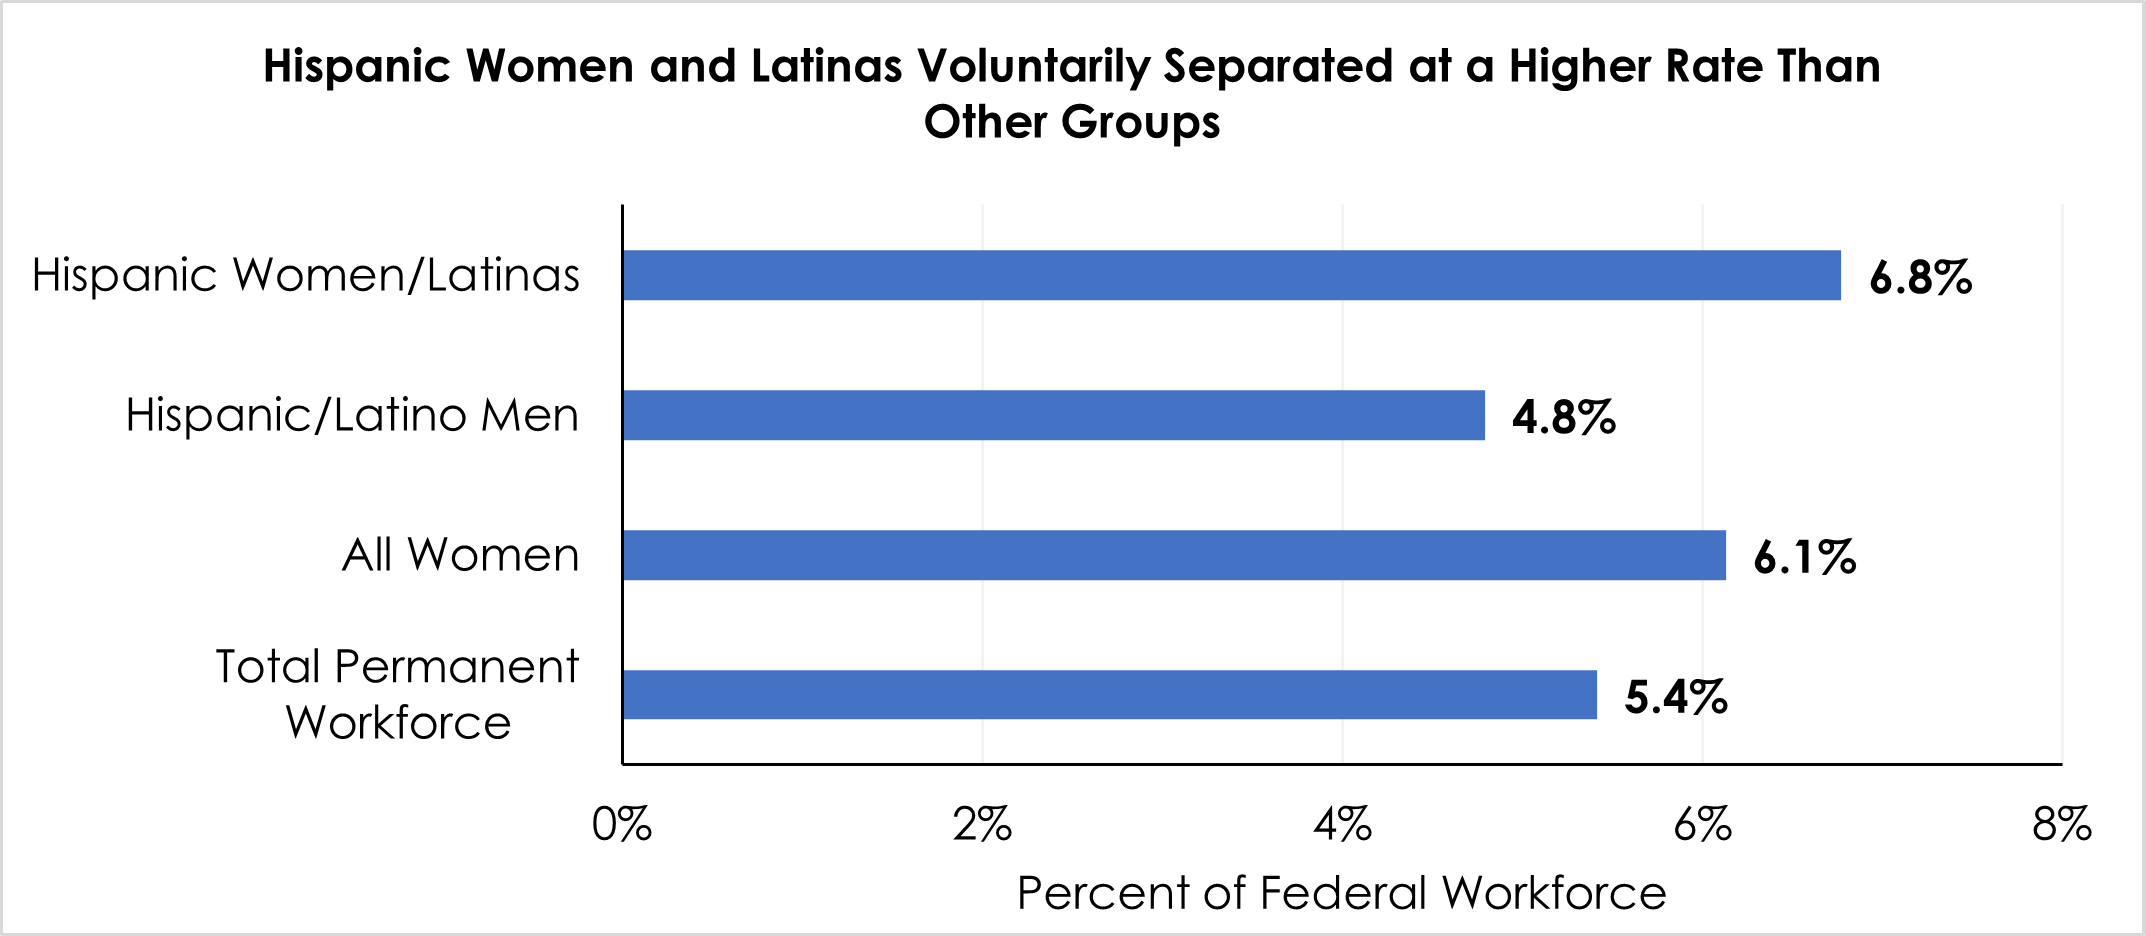 Figure 3 shows that Hispanic and Latina women voluntarily separated at a higher rate than other groups in fiscal year 2020.  5.4% federal employees voluntary separate.  6.1% women voluntary separate in the federal sector.4.8% Hispanic/Latino men voluntary separate in the federal sector.  6.8% Hispanic/Latina women voluntary separate in the federal sector.